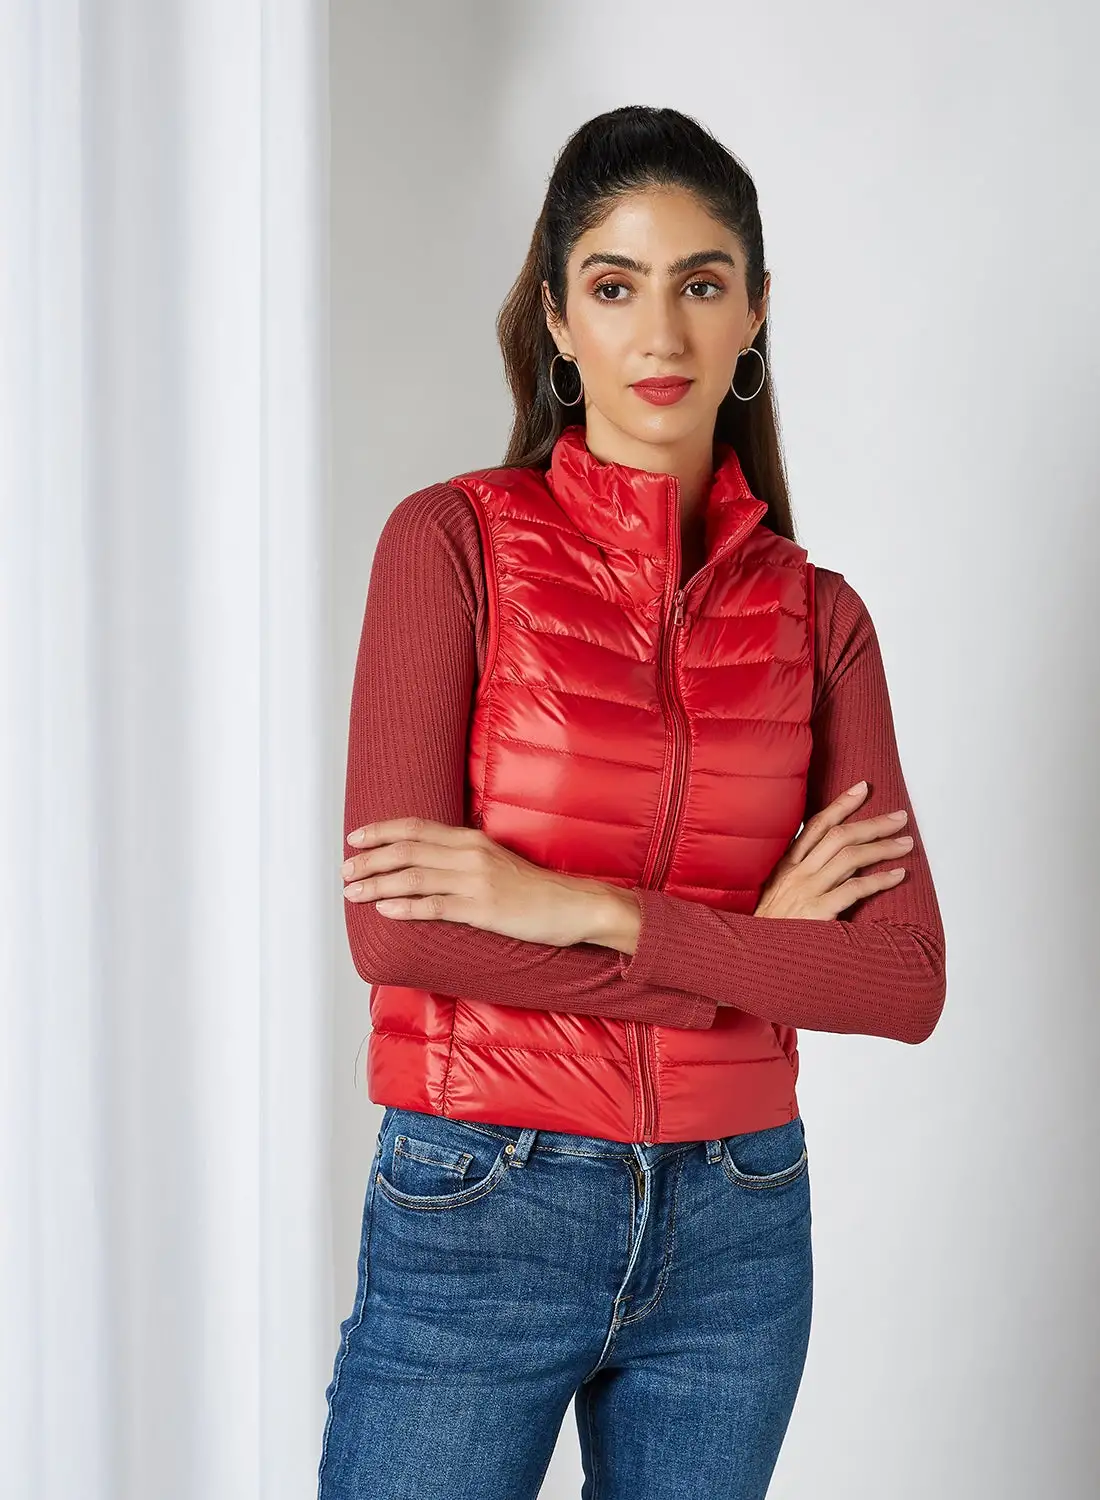 Anaqa Solid Design Sleeveless Down Jacket Red